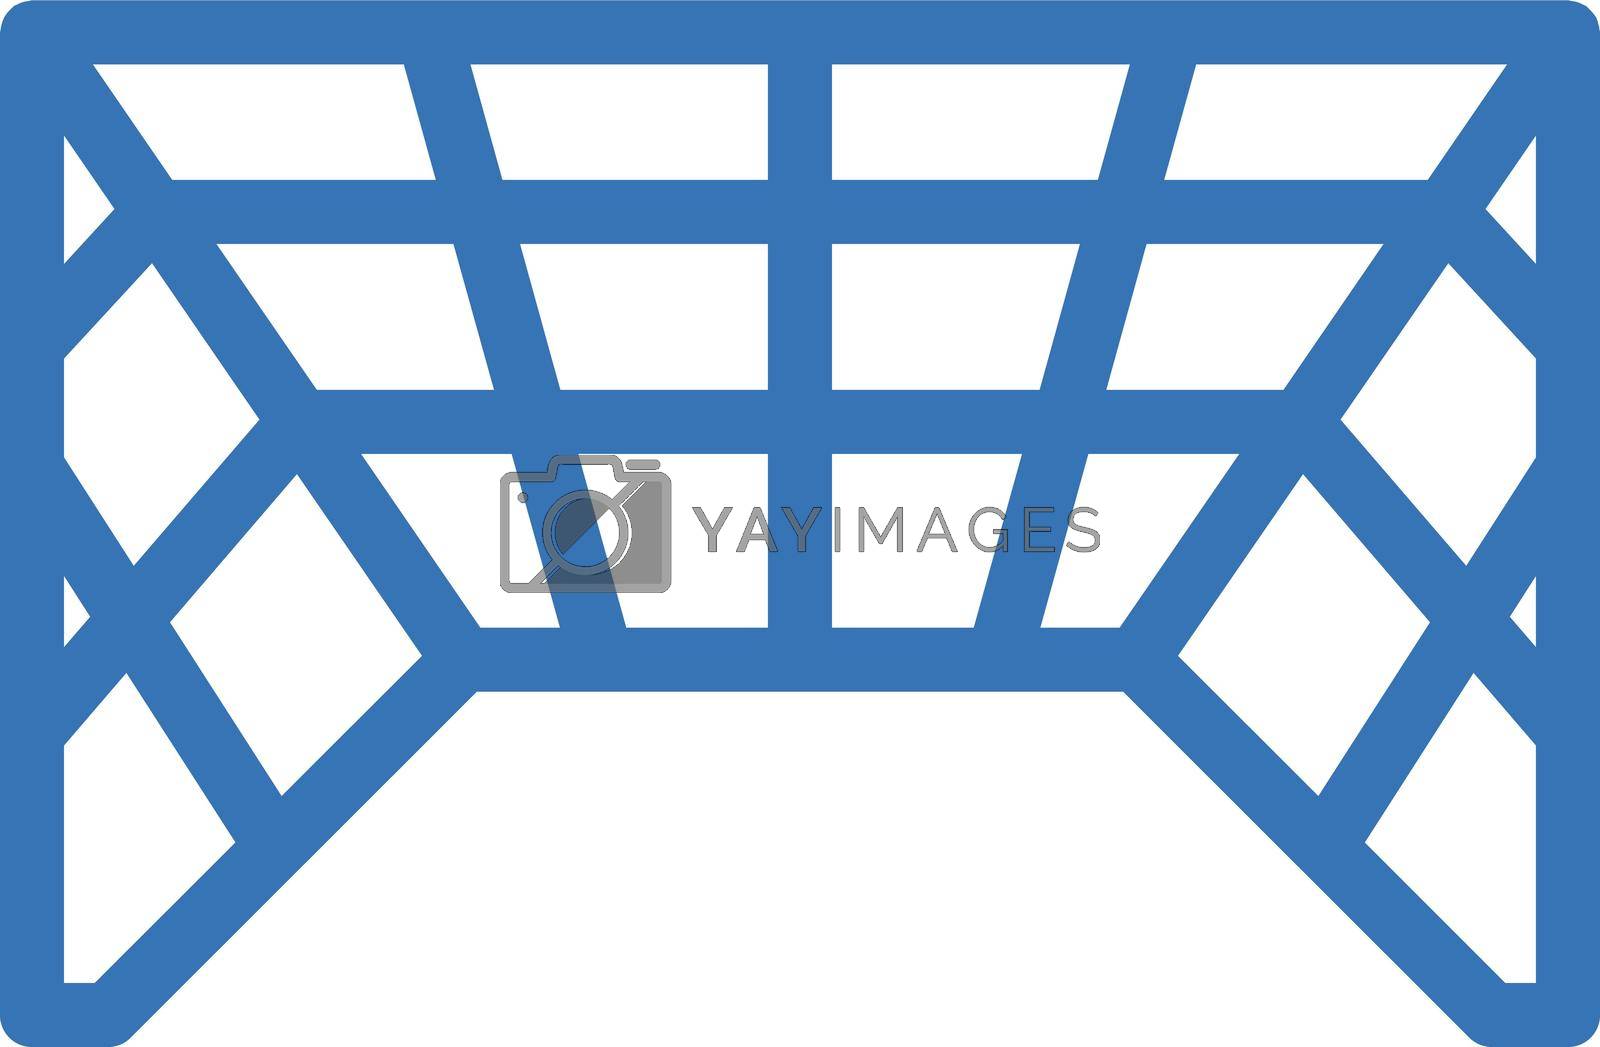 Royalty free image of net by FlaticonsDesign